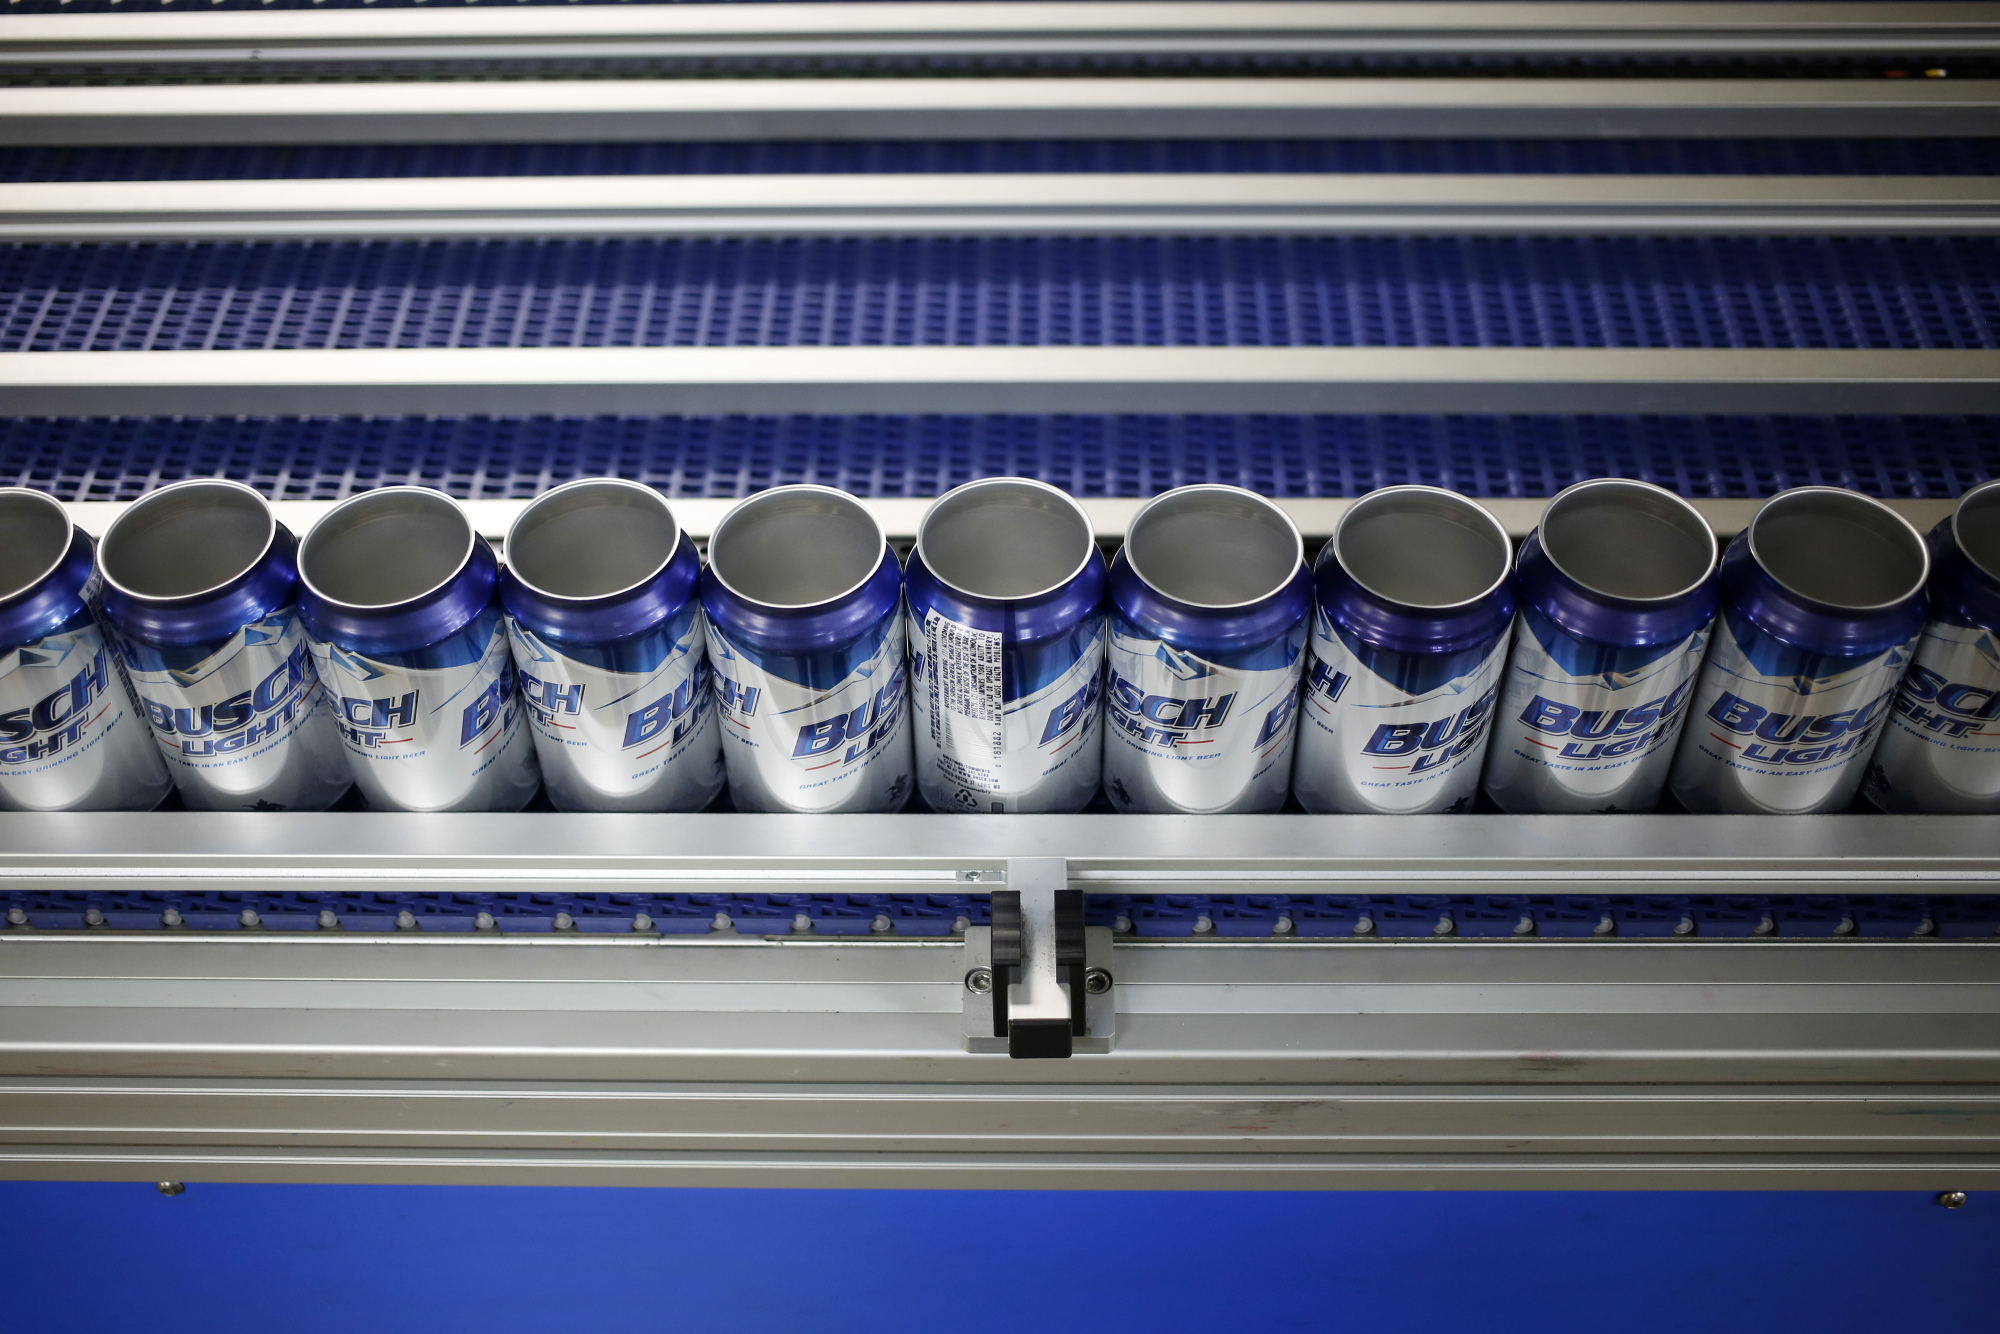 Beer Pong Getting Sustainability Makeover with New Aluminum Cup - Bloomberg